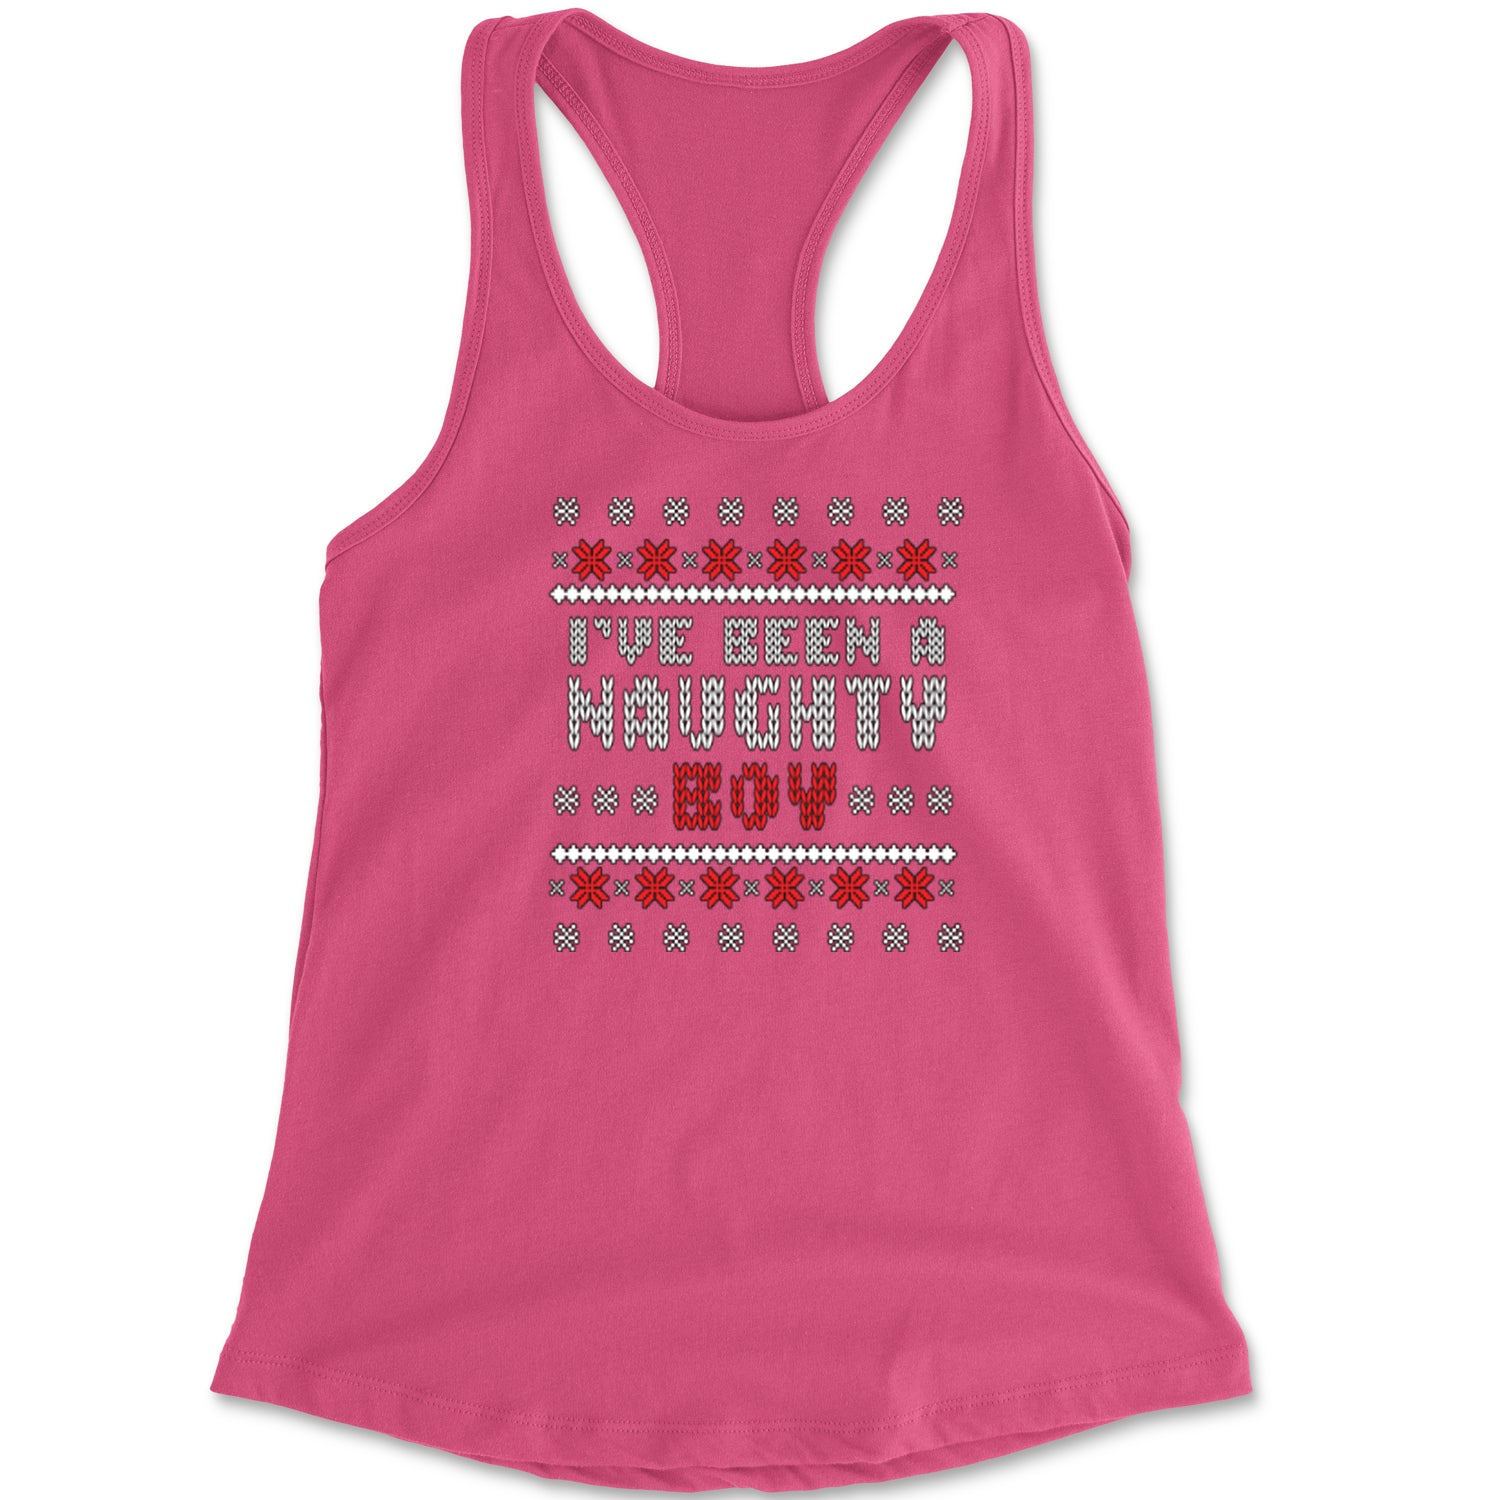 I've Been A Naughty Boy Ugly Christmas Racerback Tank Top for Women list, naughty, nice, santa, ugly, xmas by Expression Tees